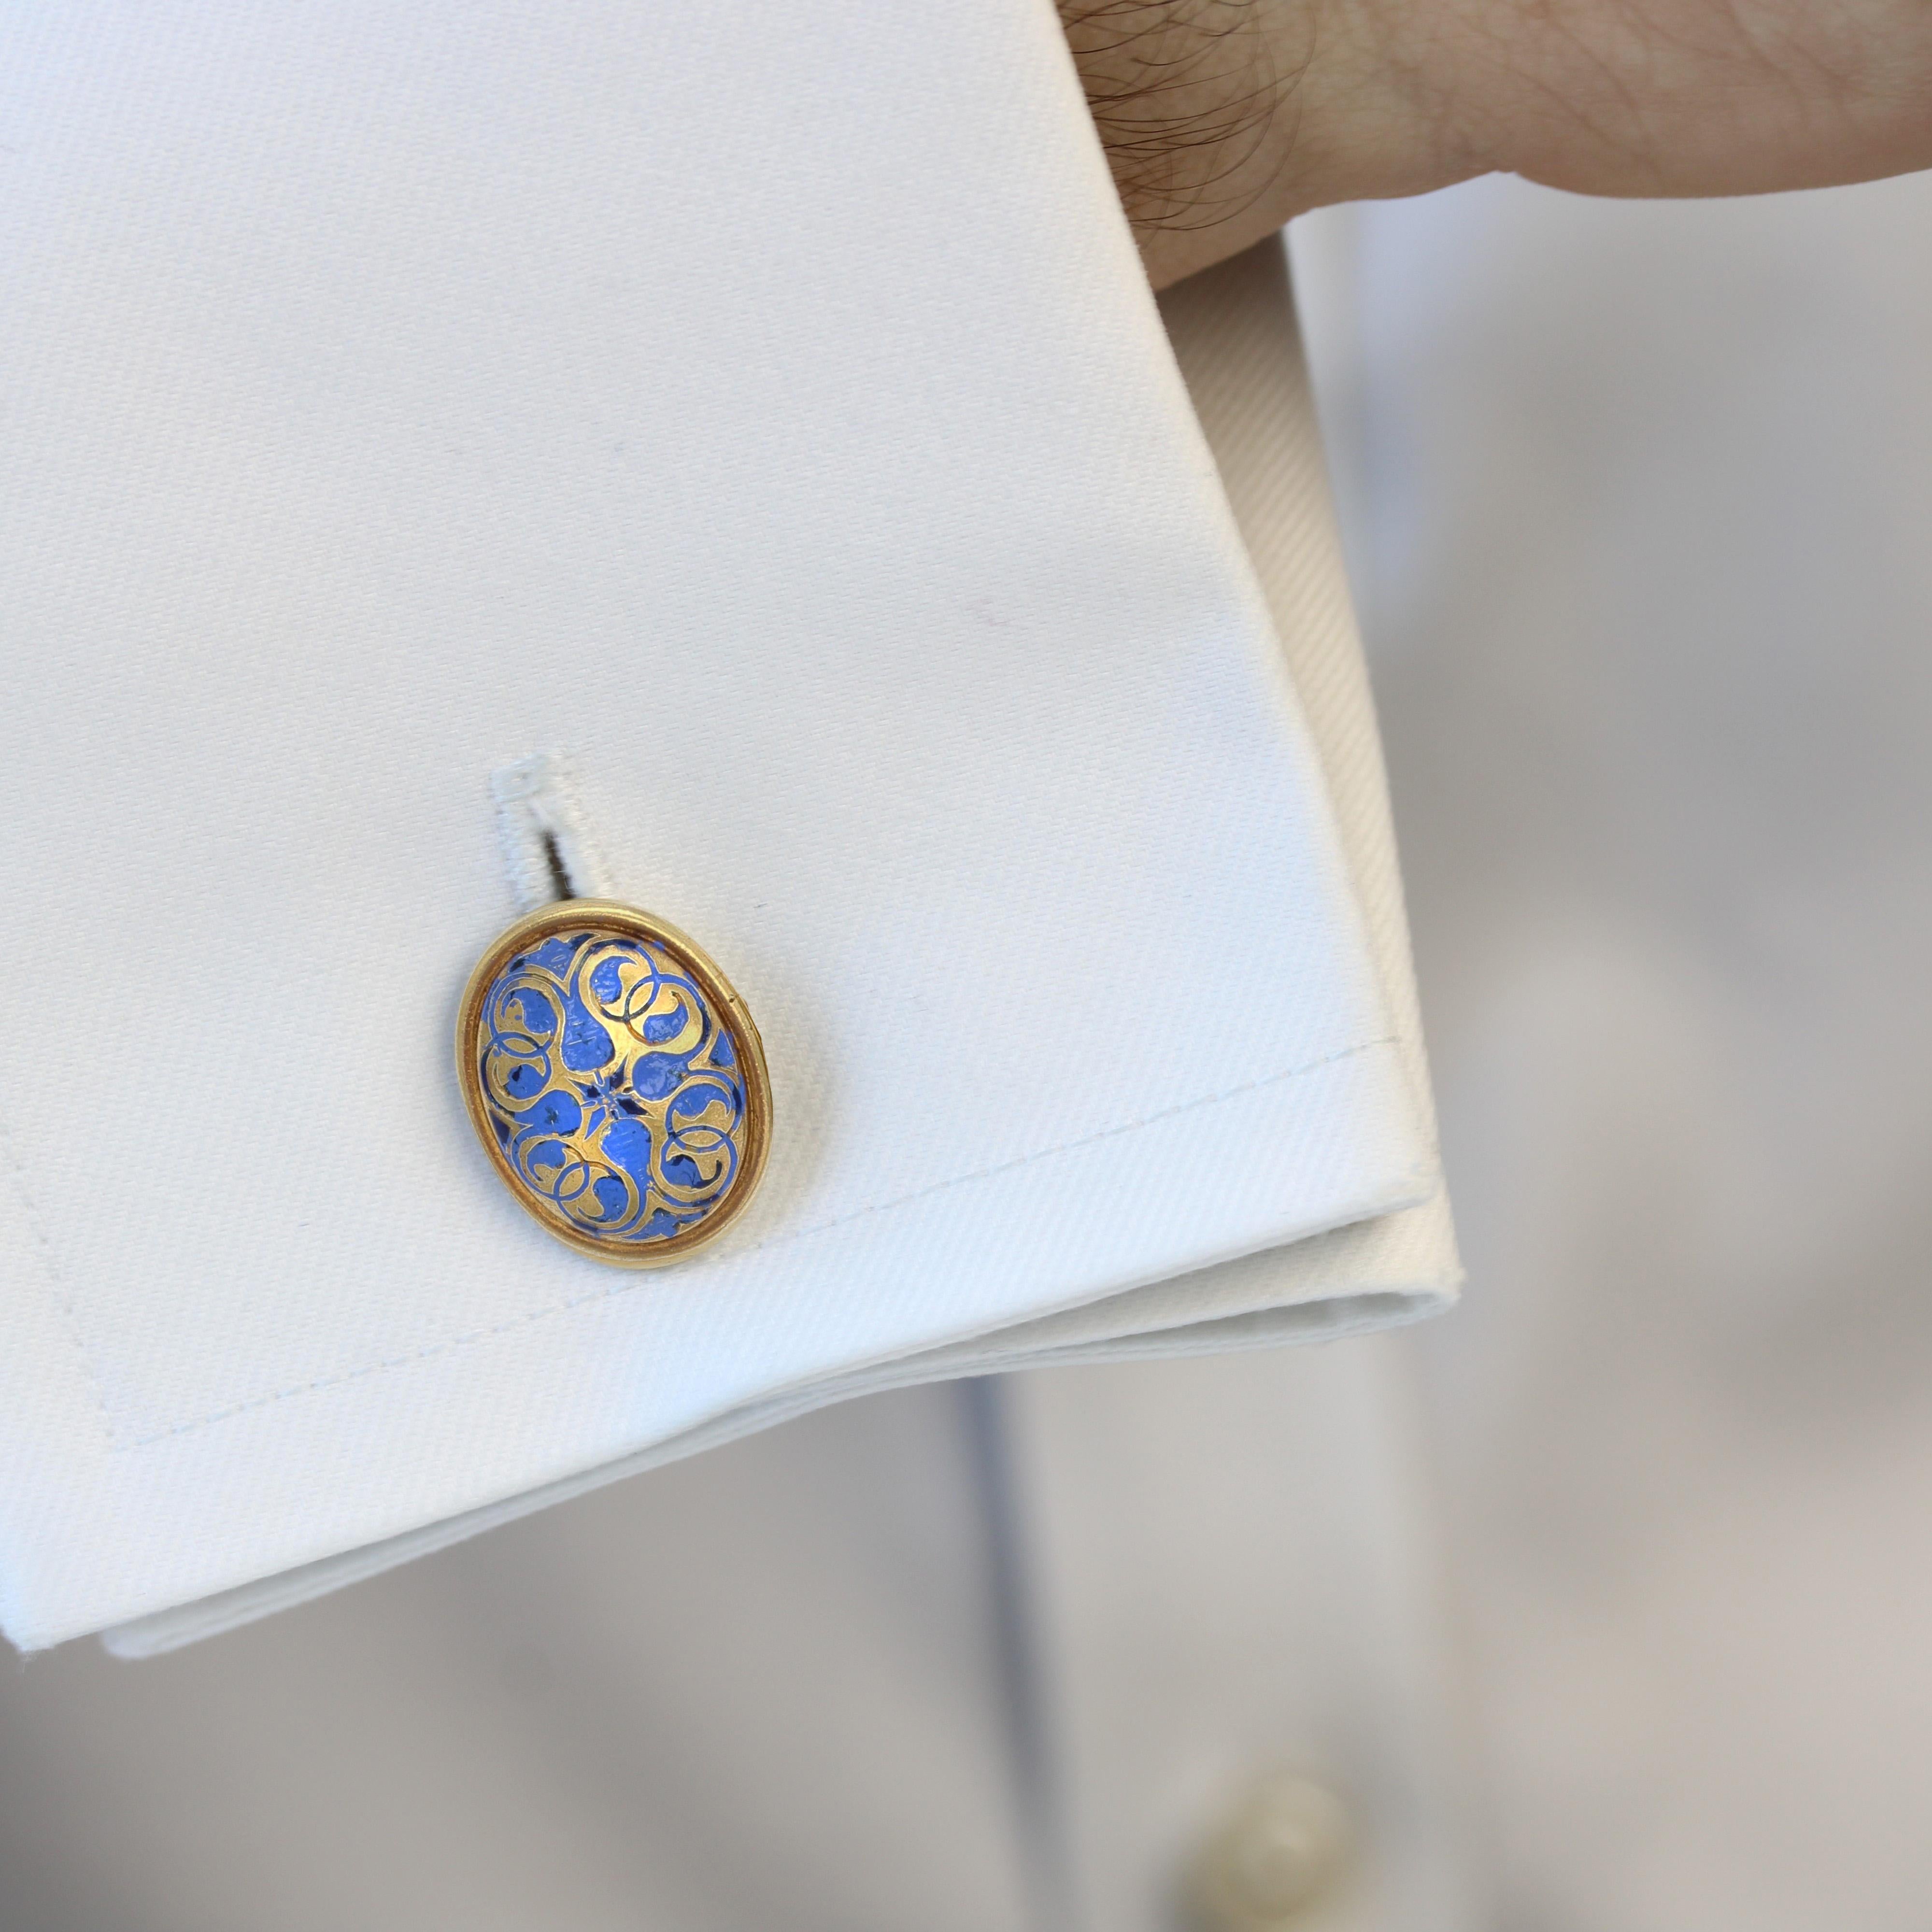 Pair of cufflinks in 14 karat yellow gold, shell hellmark.
Each antique cufflink consists of two shield patterns, chiseled with blue enamel arabesque patterns. They are held by a figure eight.
Height : 16,6 mm, width : 13,3 mm, thickness : 0,6